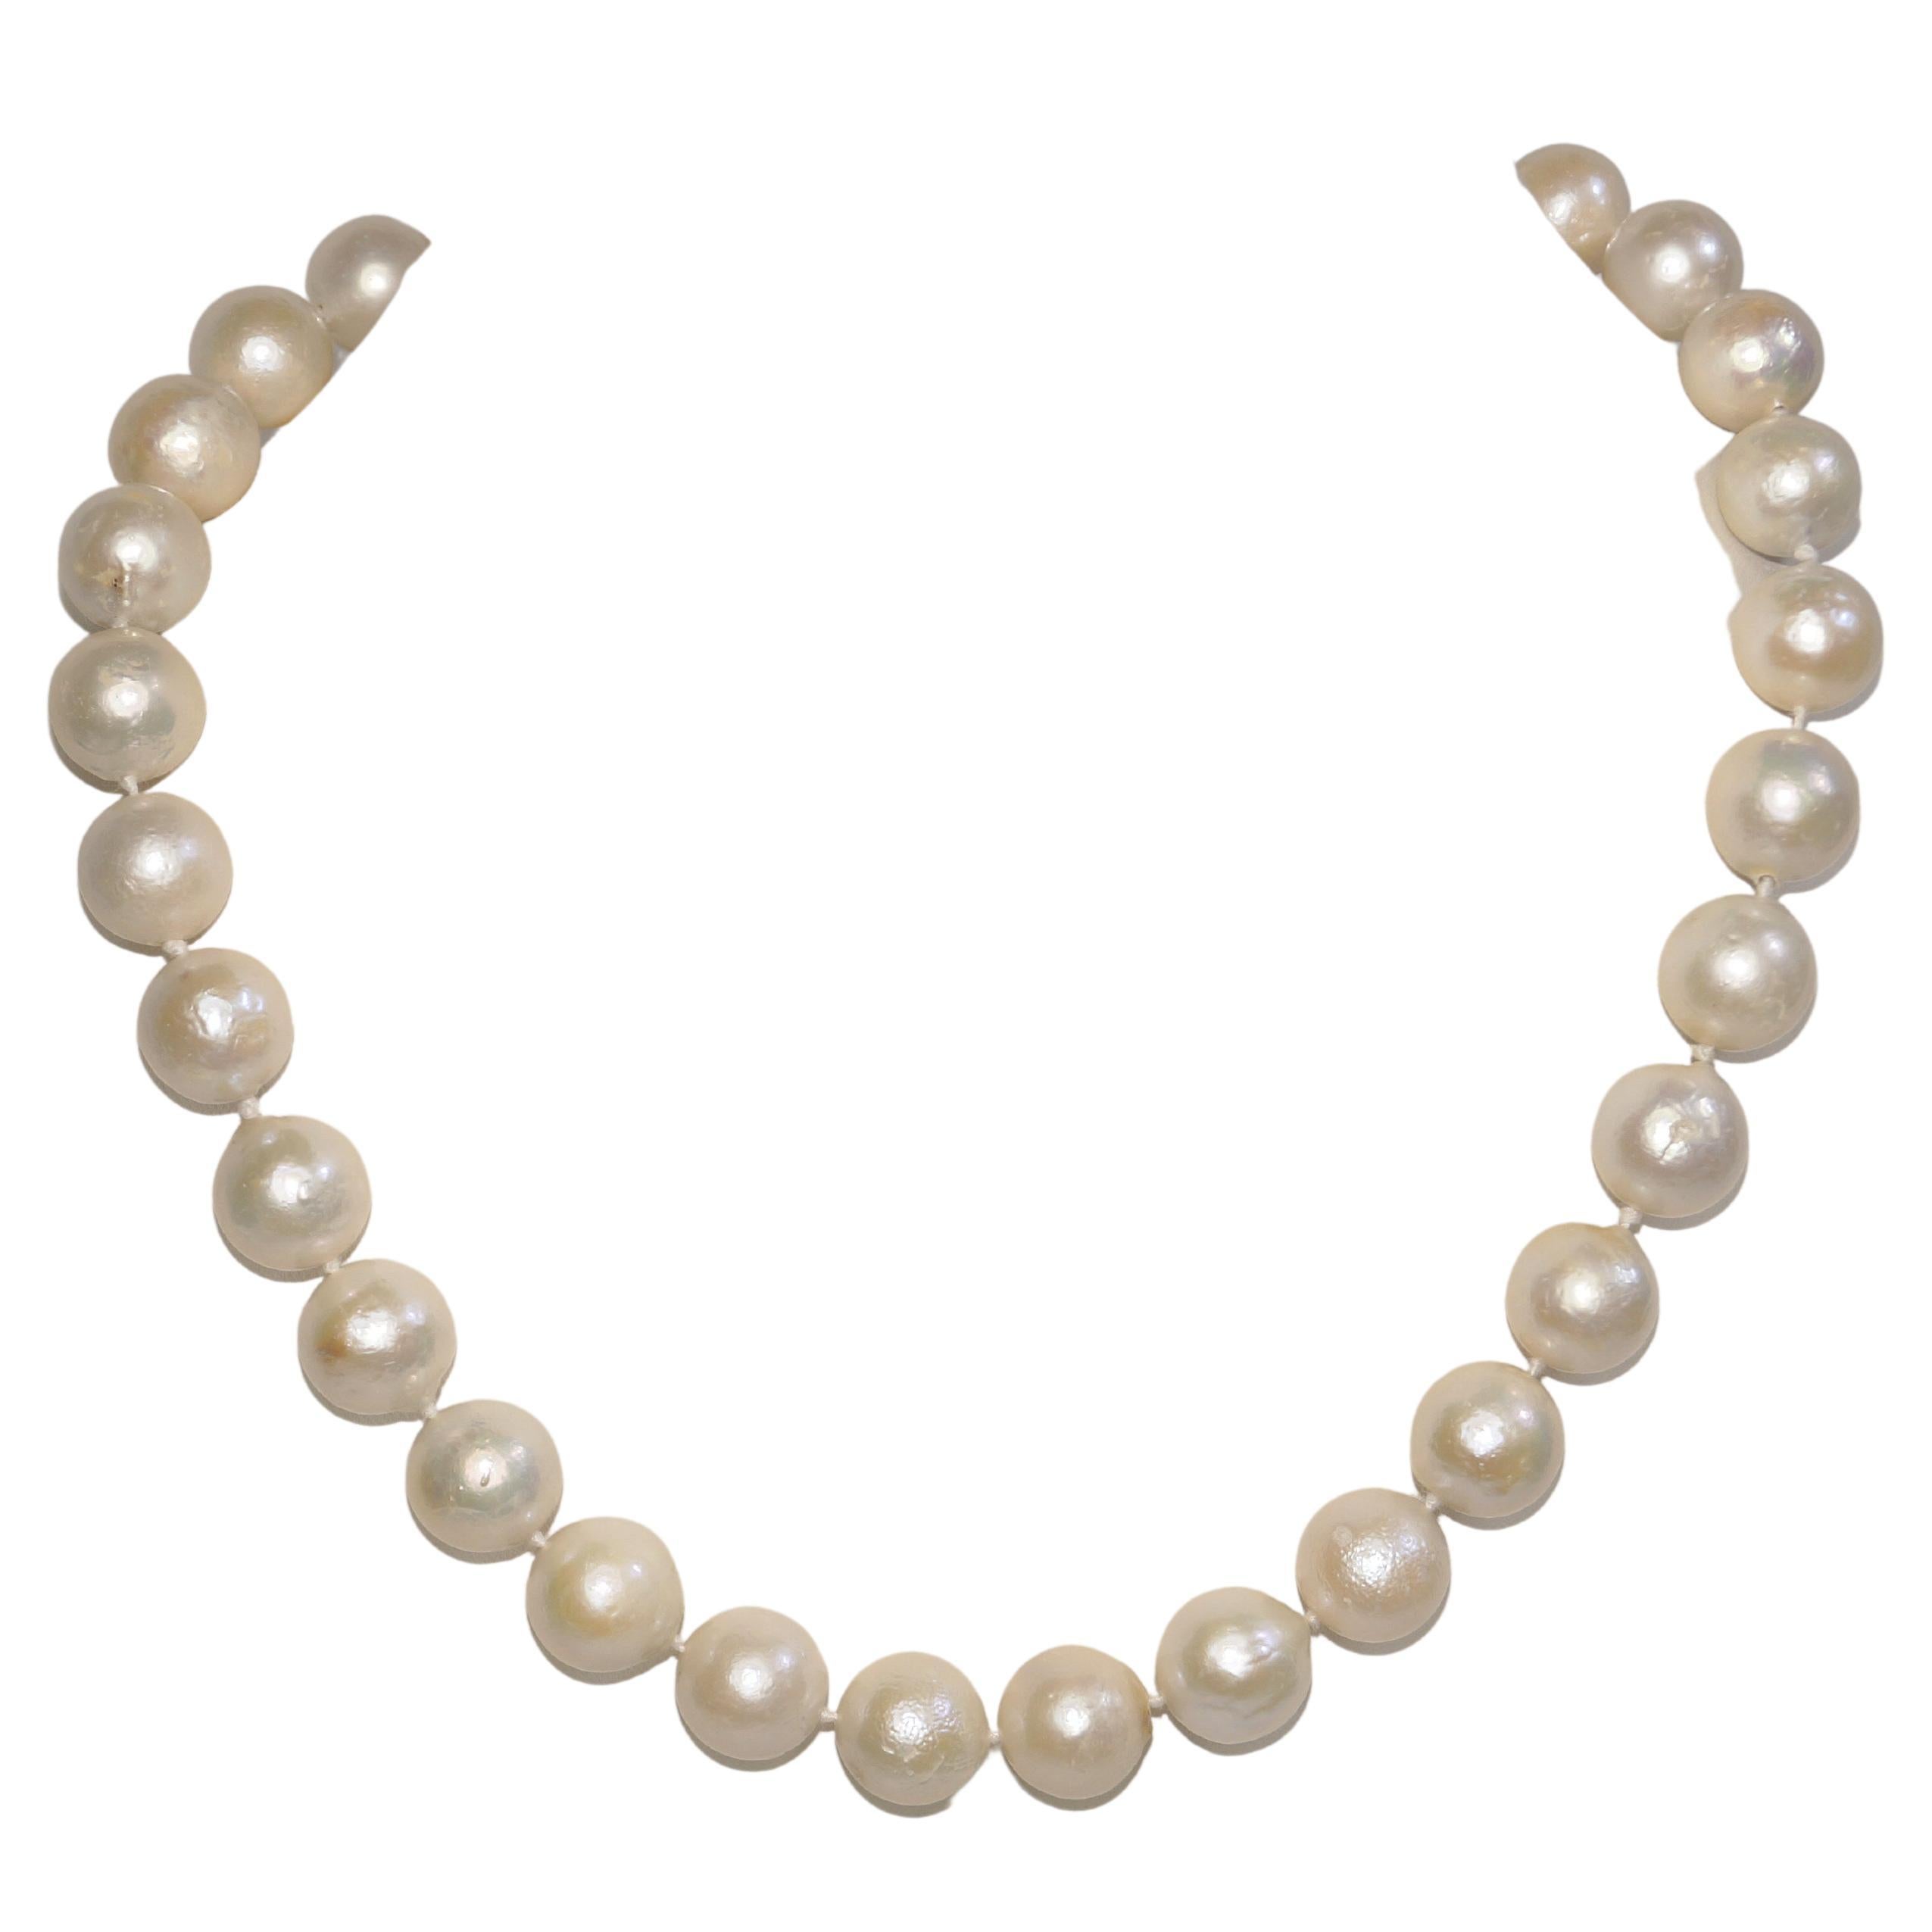 14k Gold South Sea Pearl necklace 12-15mm Big Round Wedding necklace 